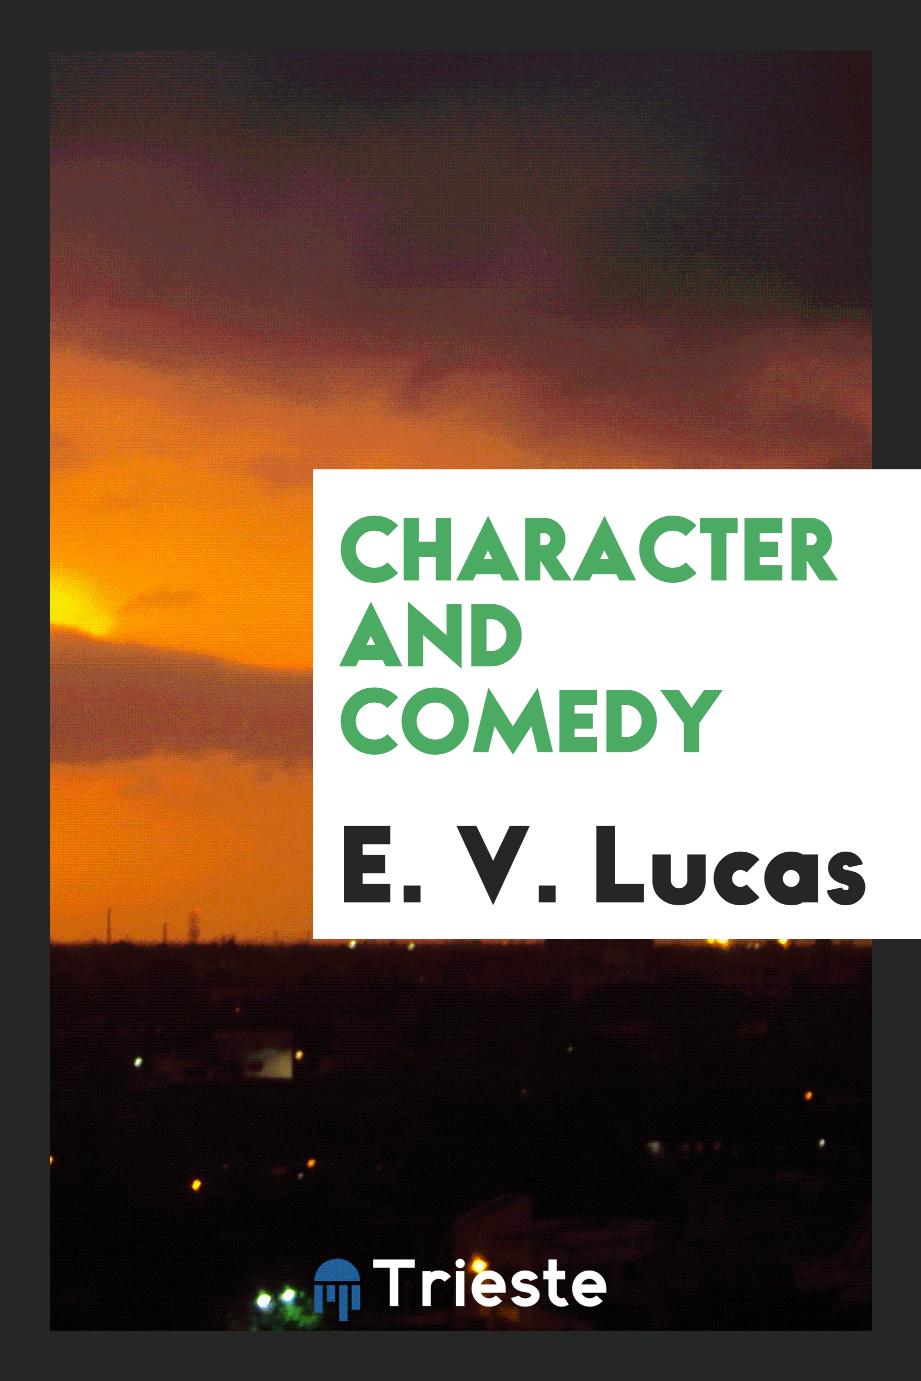 E. V. Lucas - Character and comedy